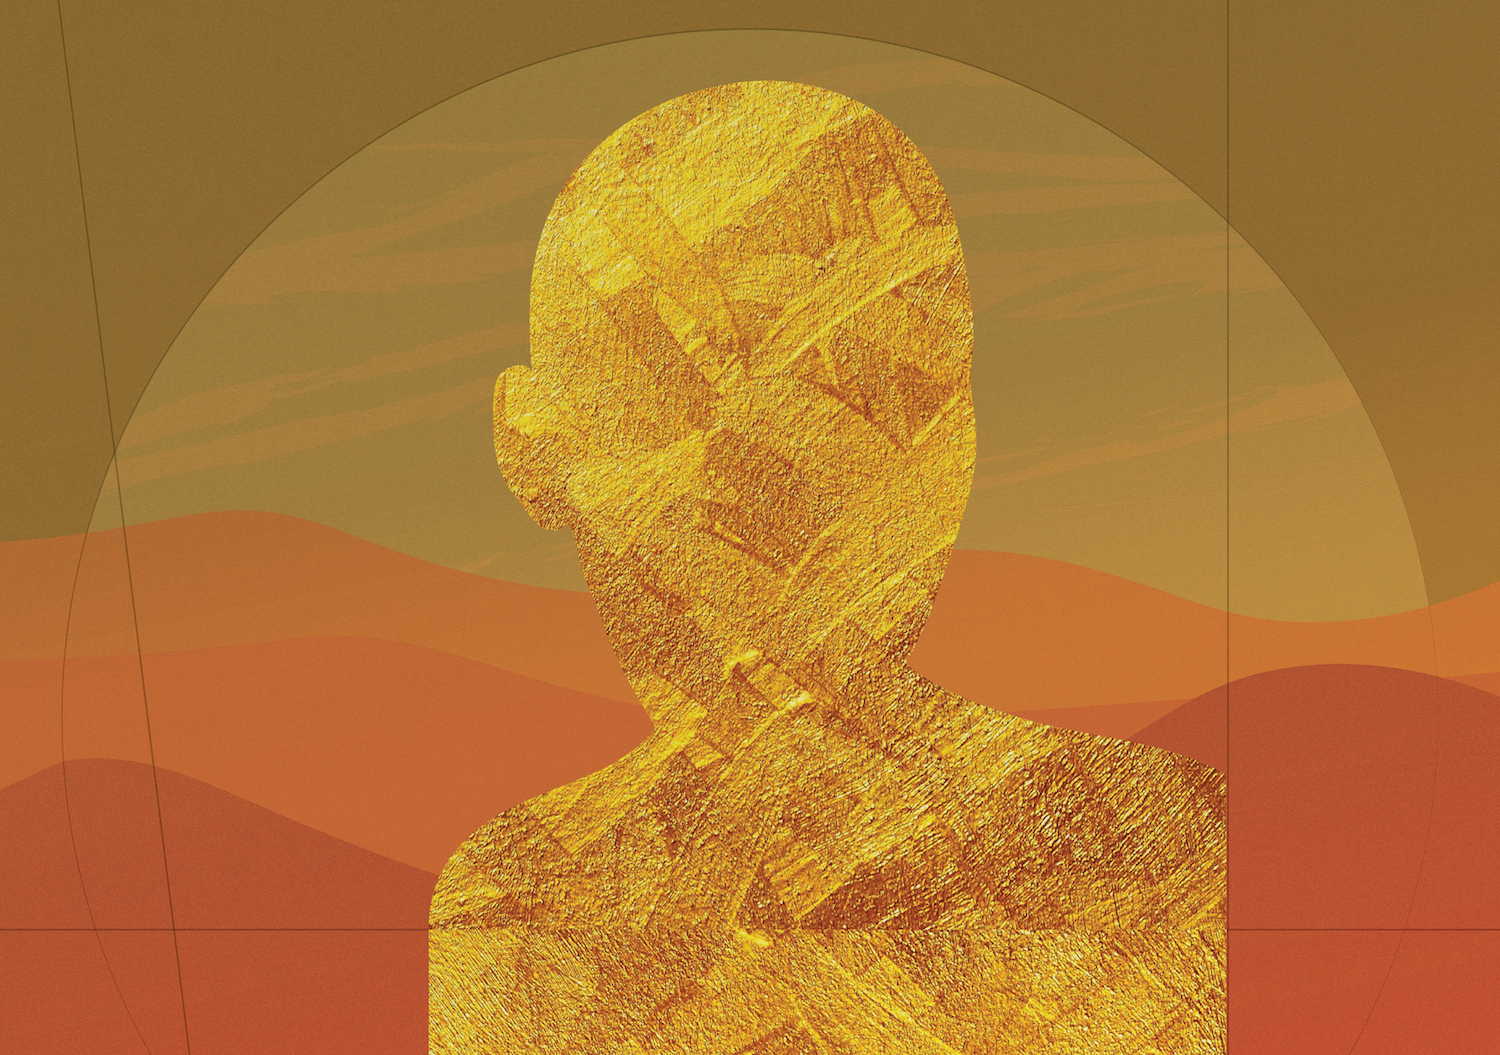 Abstract gold silhouette of a woman in a desolate landscape